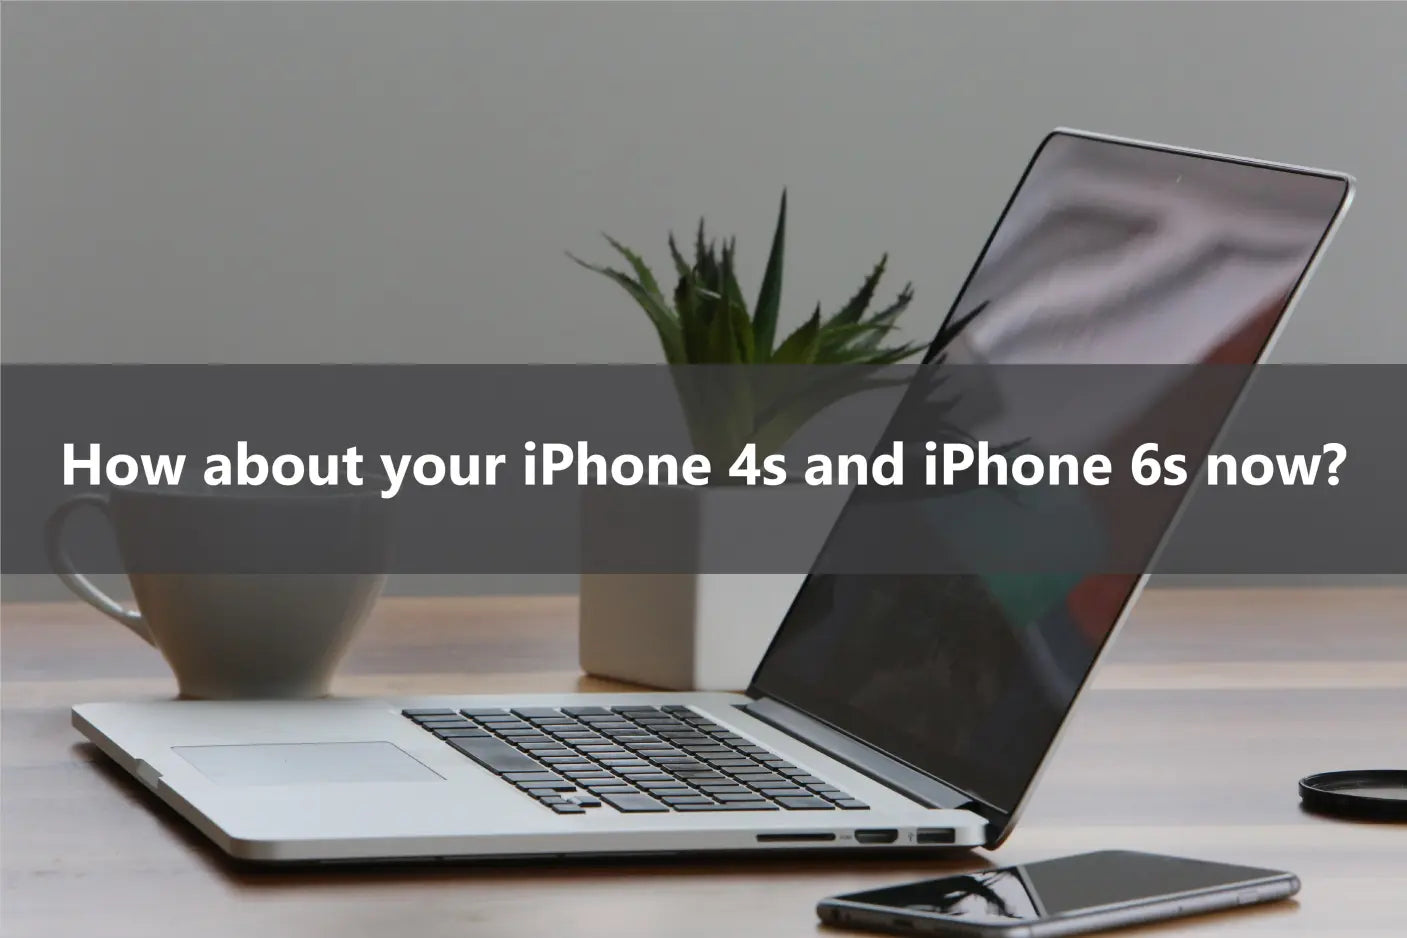 How about your iPhone 4s and iPhone 6s now?